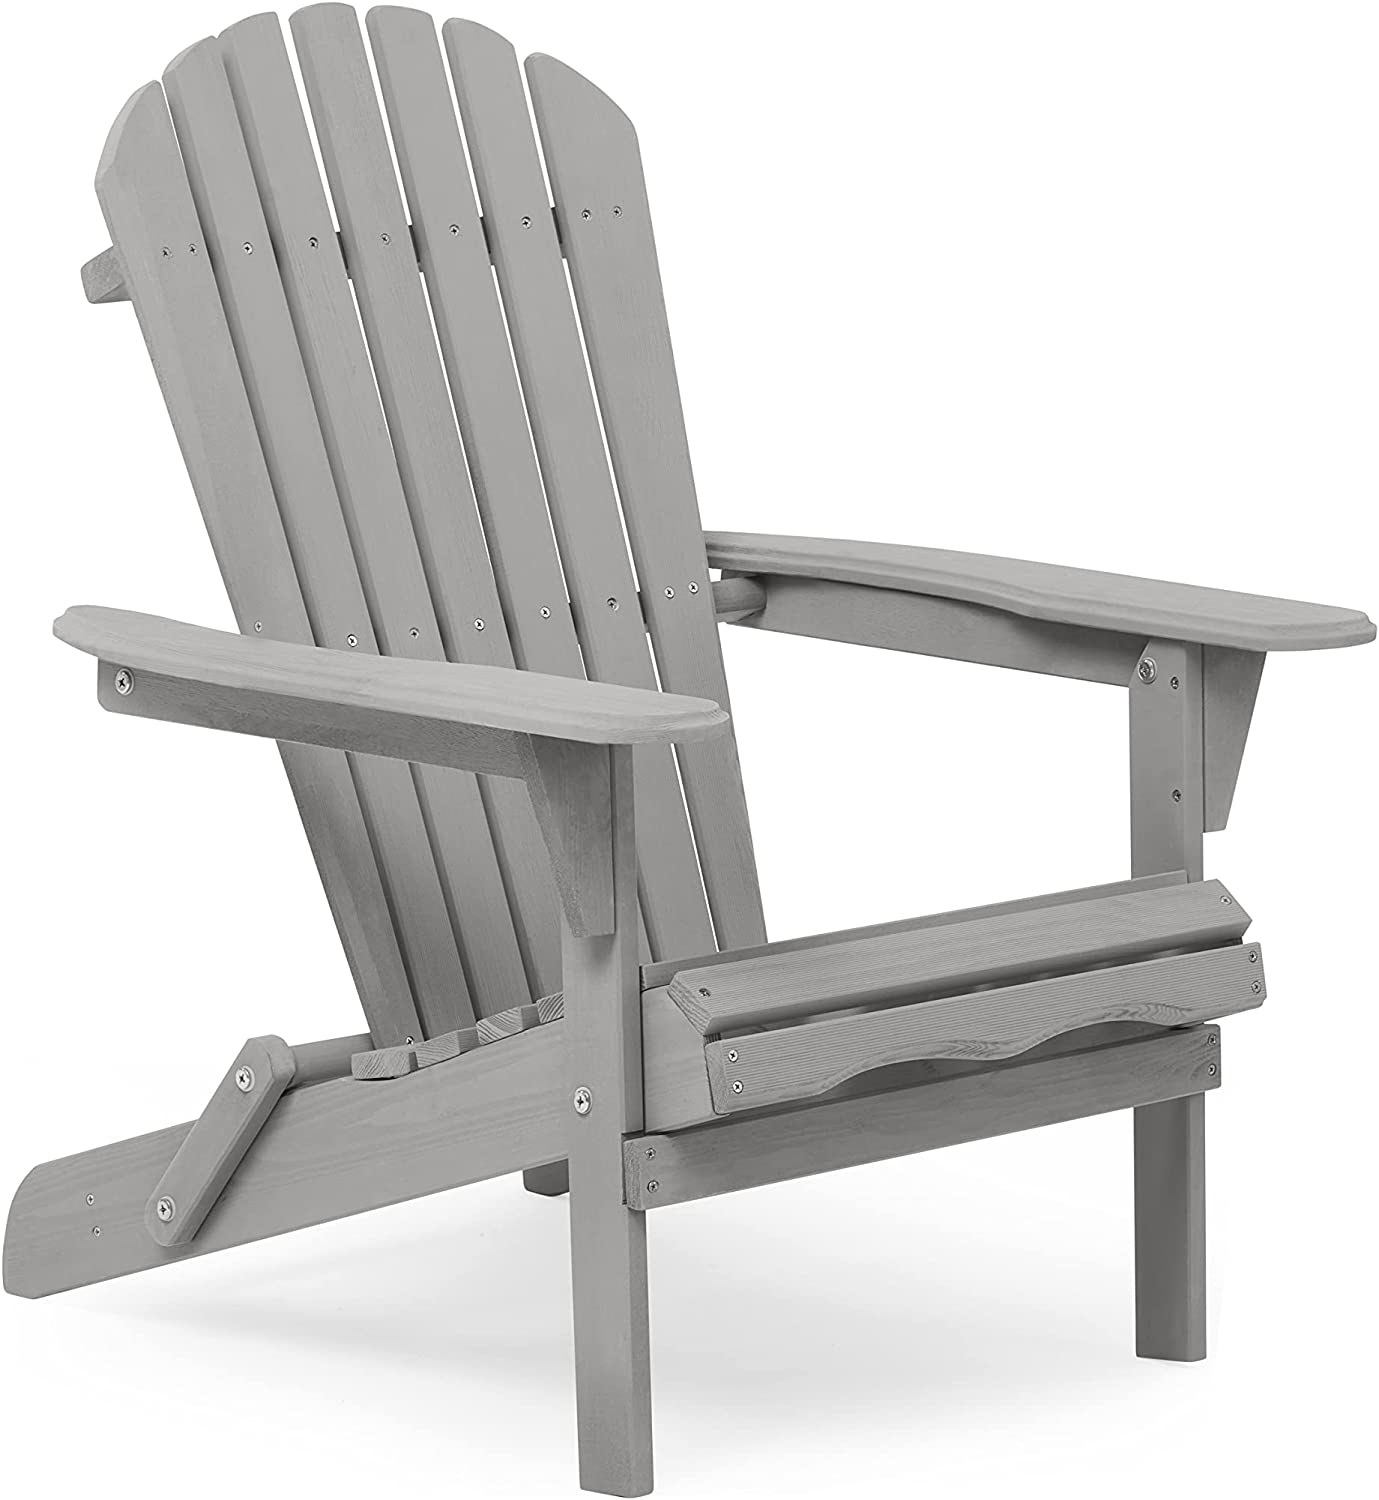 CLEARANCE! Wood Lounge Patio Chair for Garden Outdoor Wooden Folding Adirondack Chair Set of 2 Solid Cedar Wood Lounge Patio Chair for Garden, Lawn, Backyard, - image 3 of 9